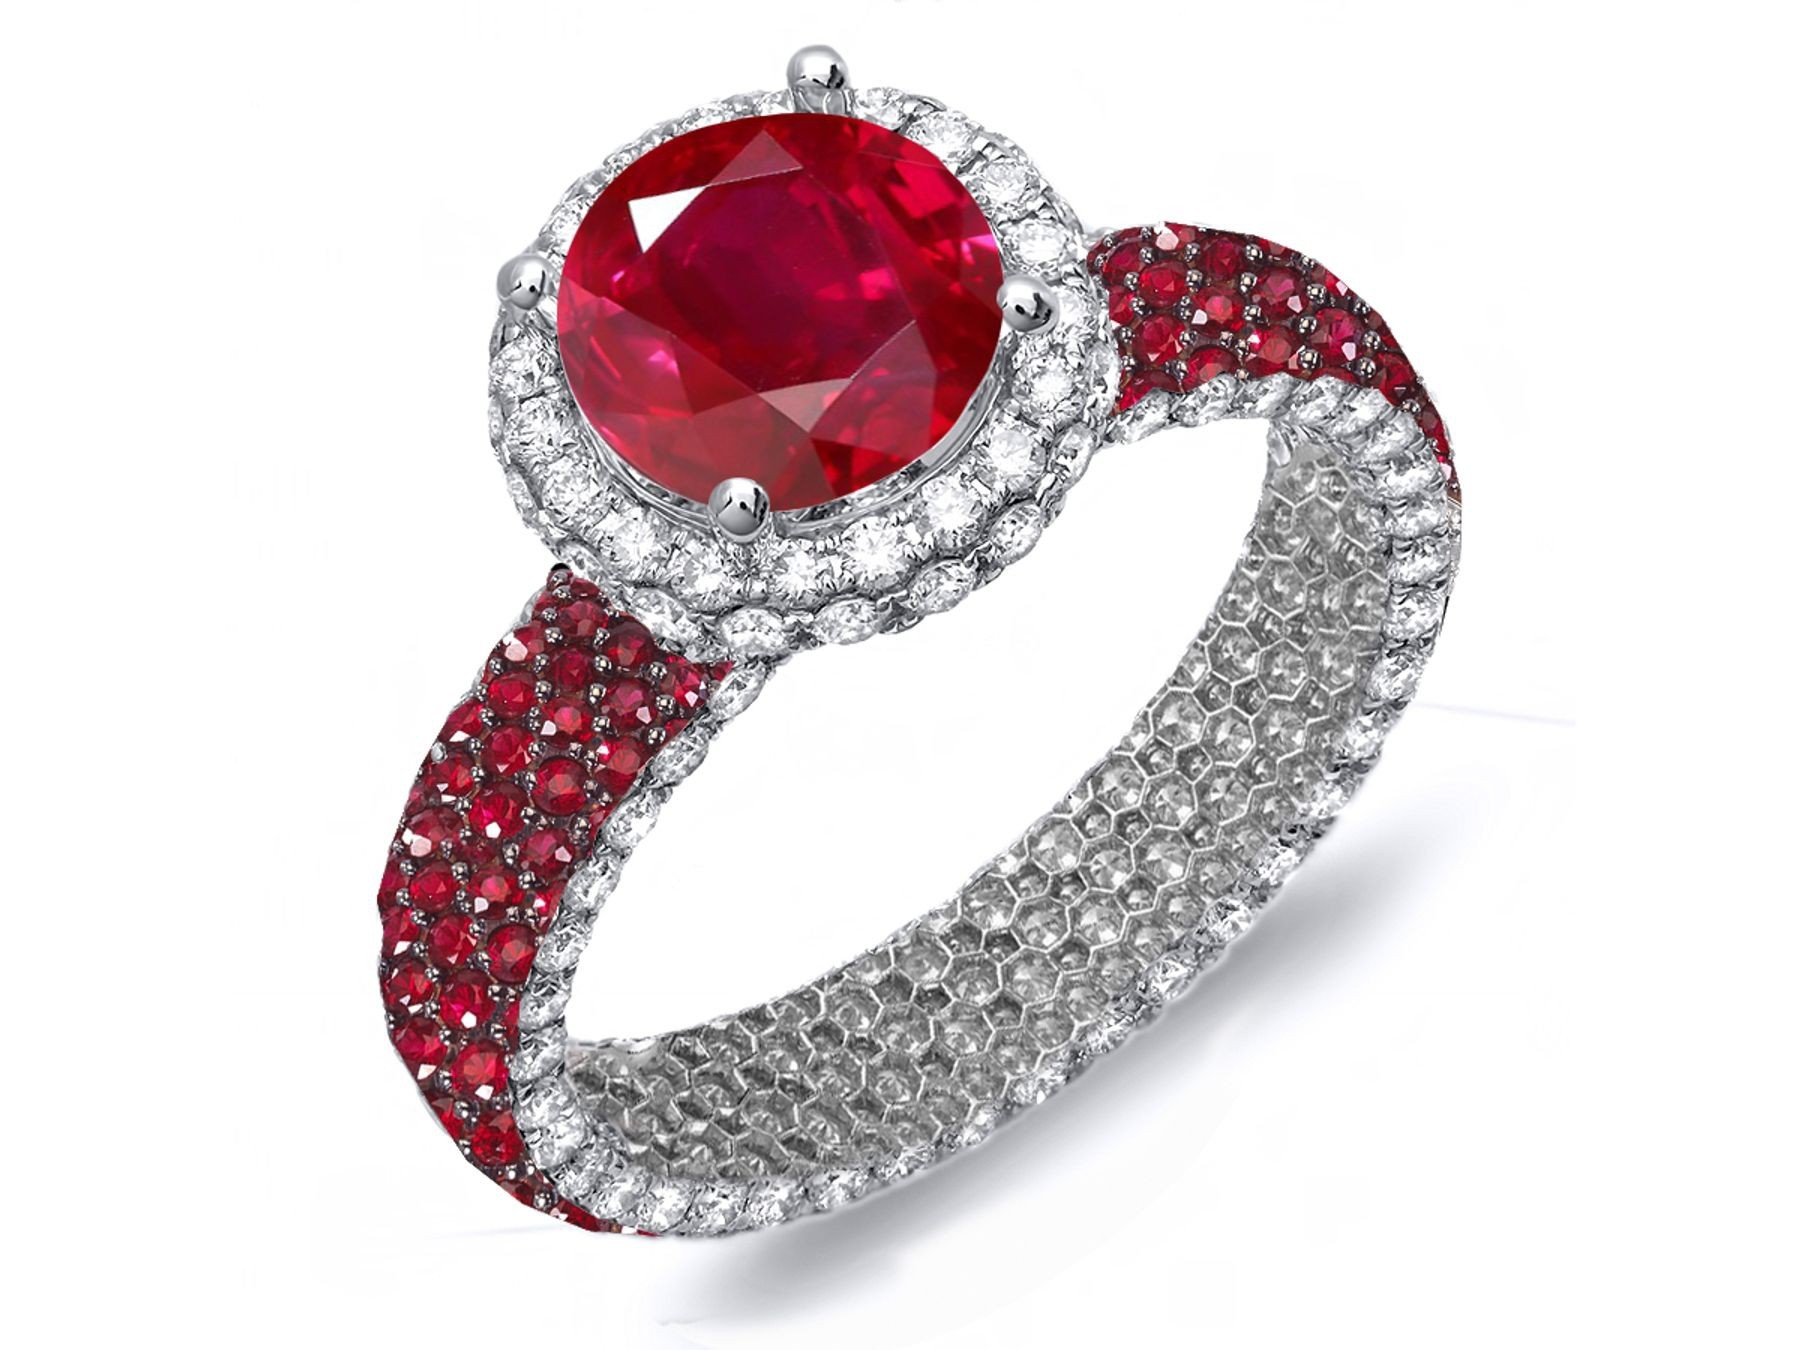 Custom Delicate French Pave Halo Diamonds & Red Rubies Accent Rings